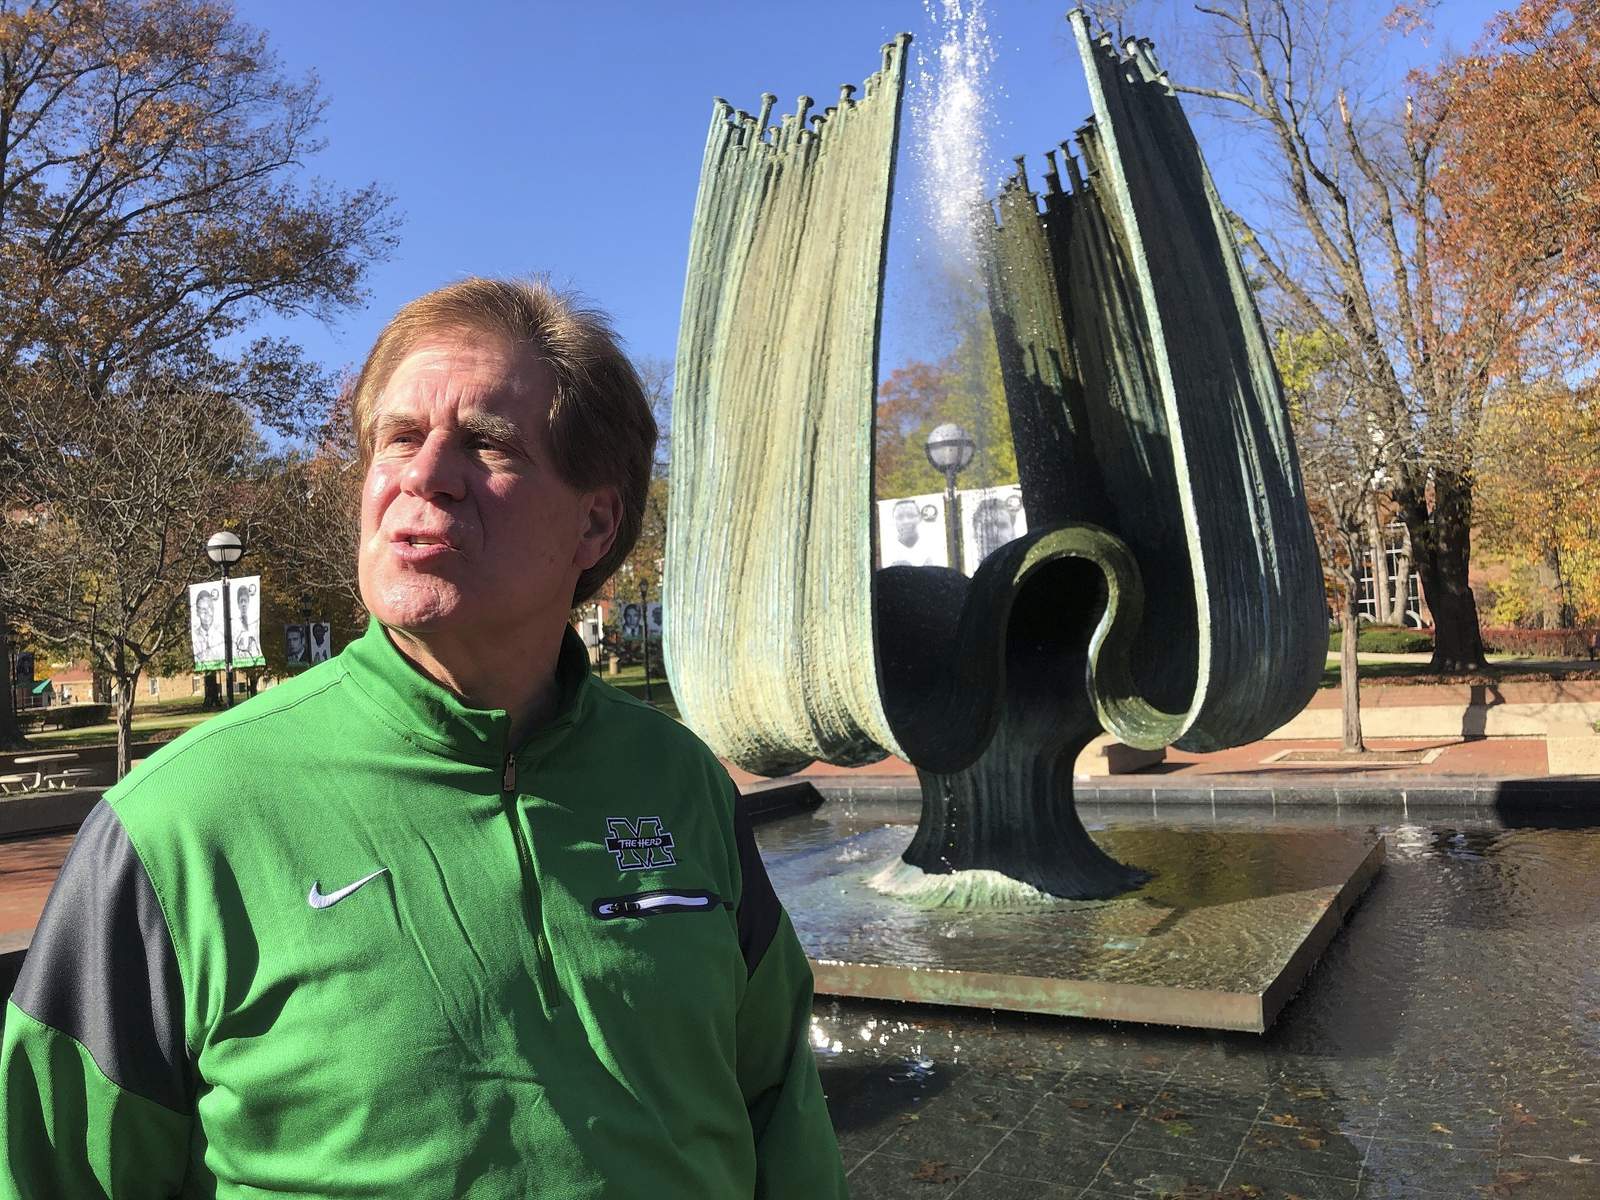 Marshall remembers worst US sports disaster 50 years later